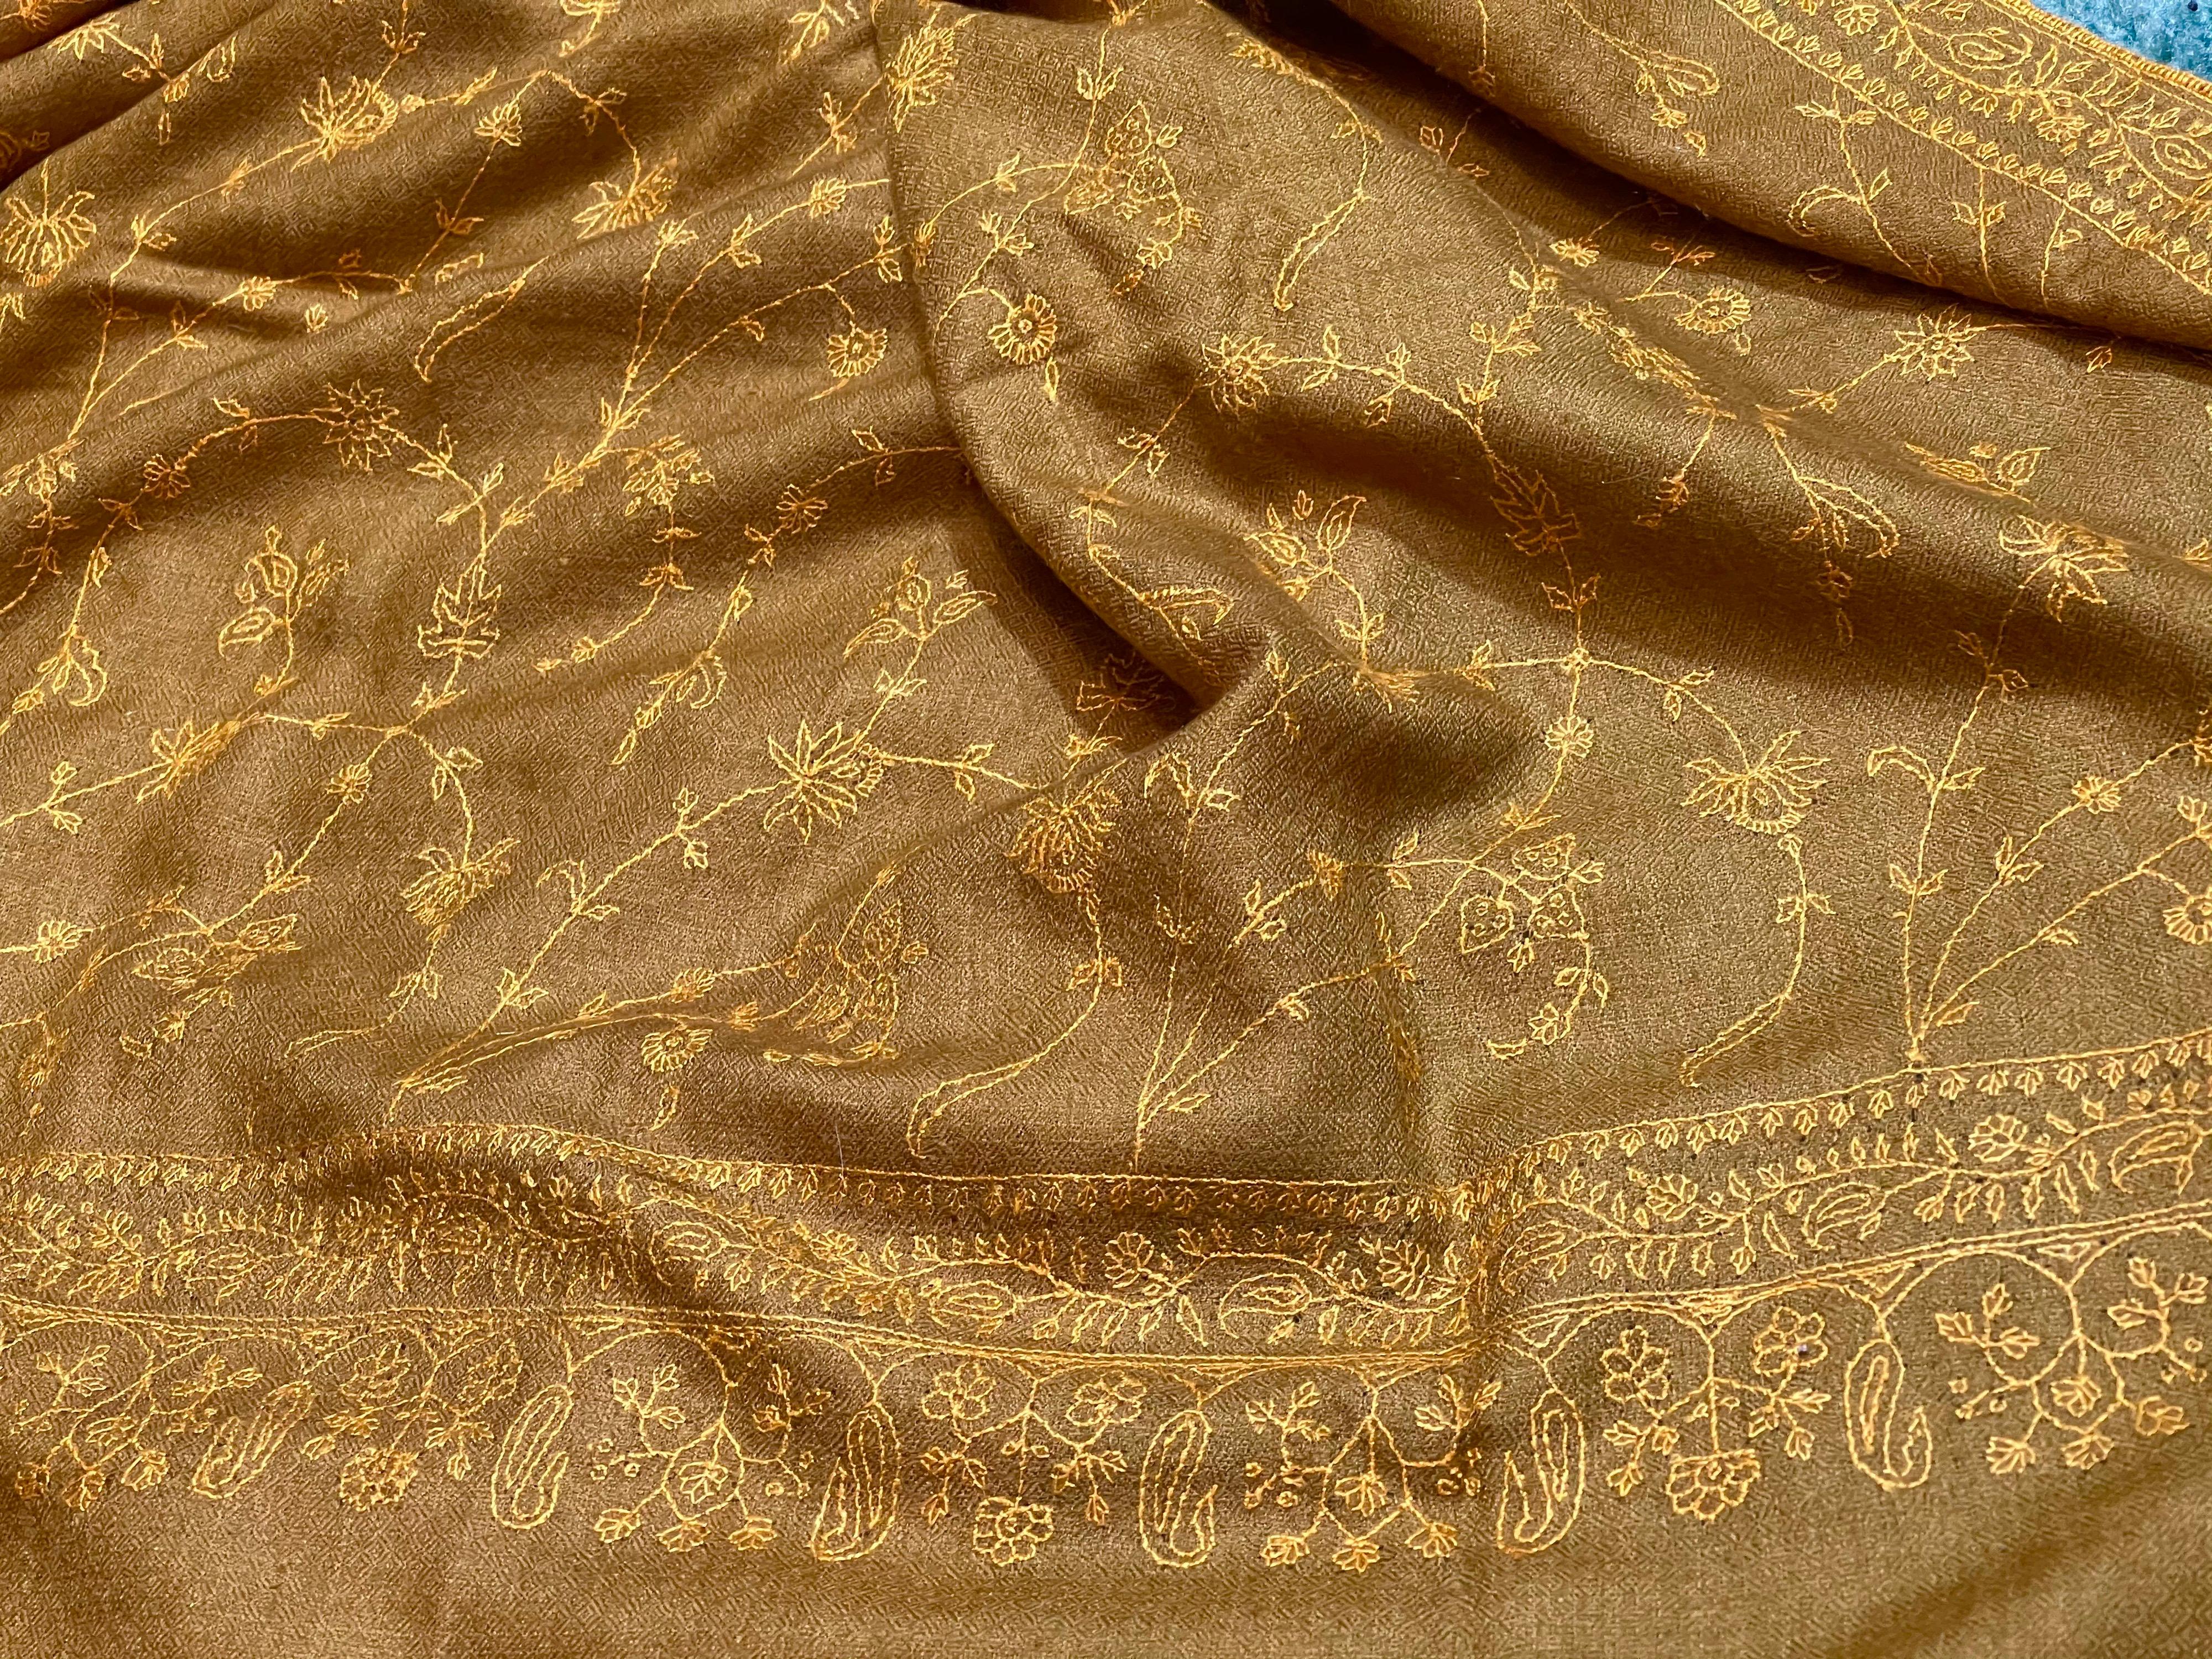 Hand Embroidered 100% Cashmere Pashmina Shawl Golden Brown Made in Kashmir  10